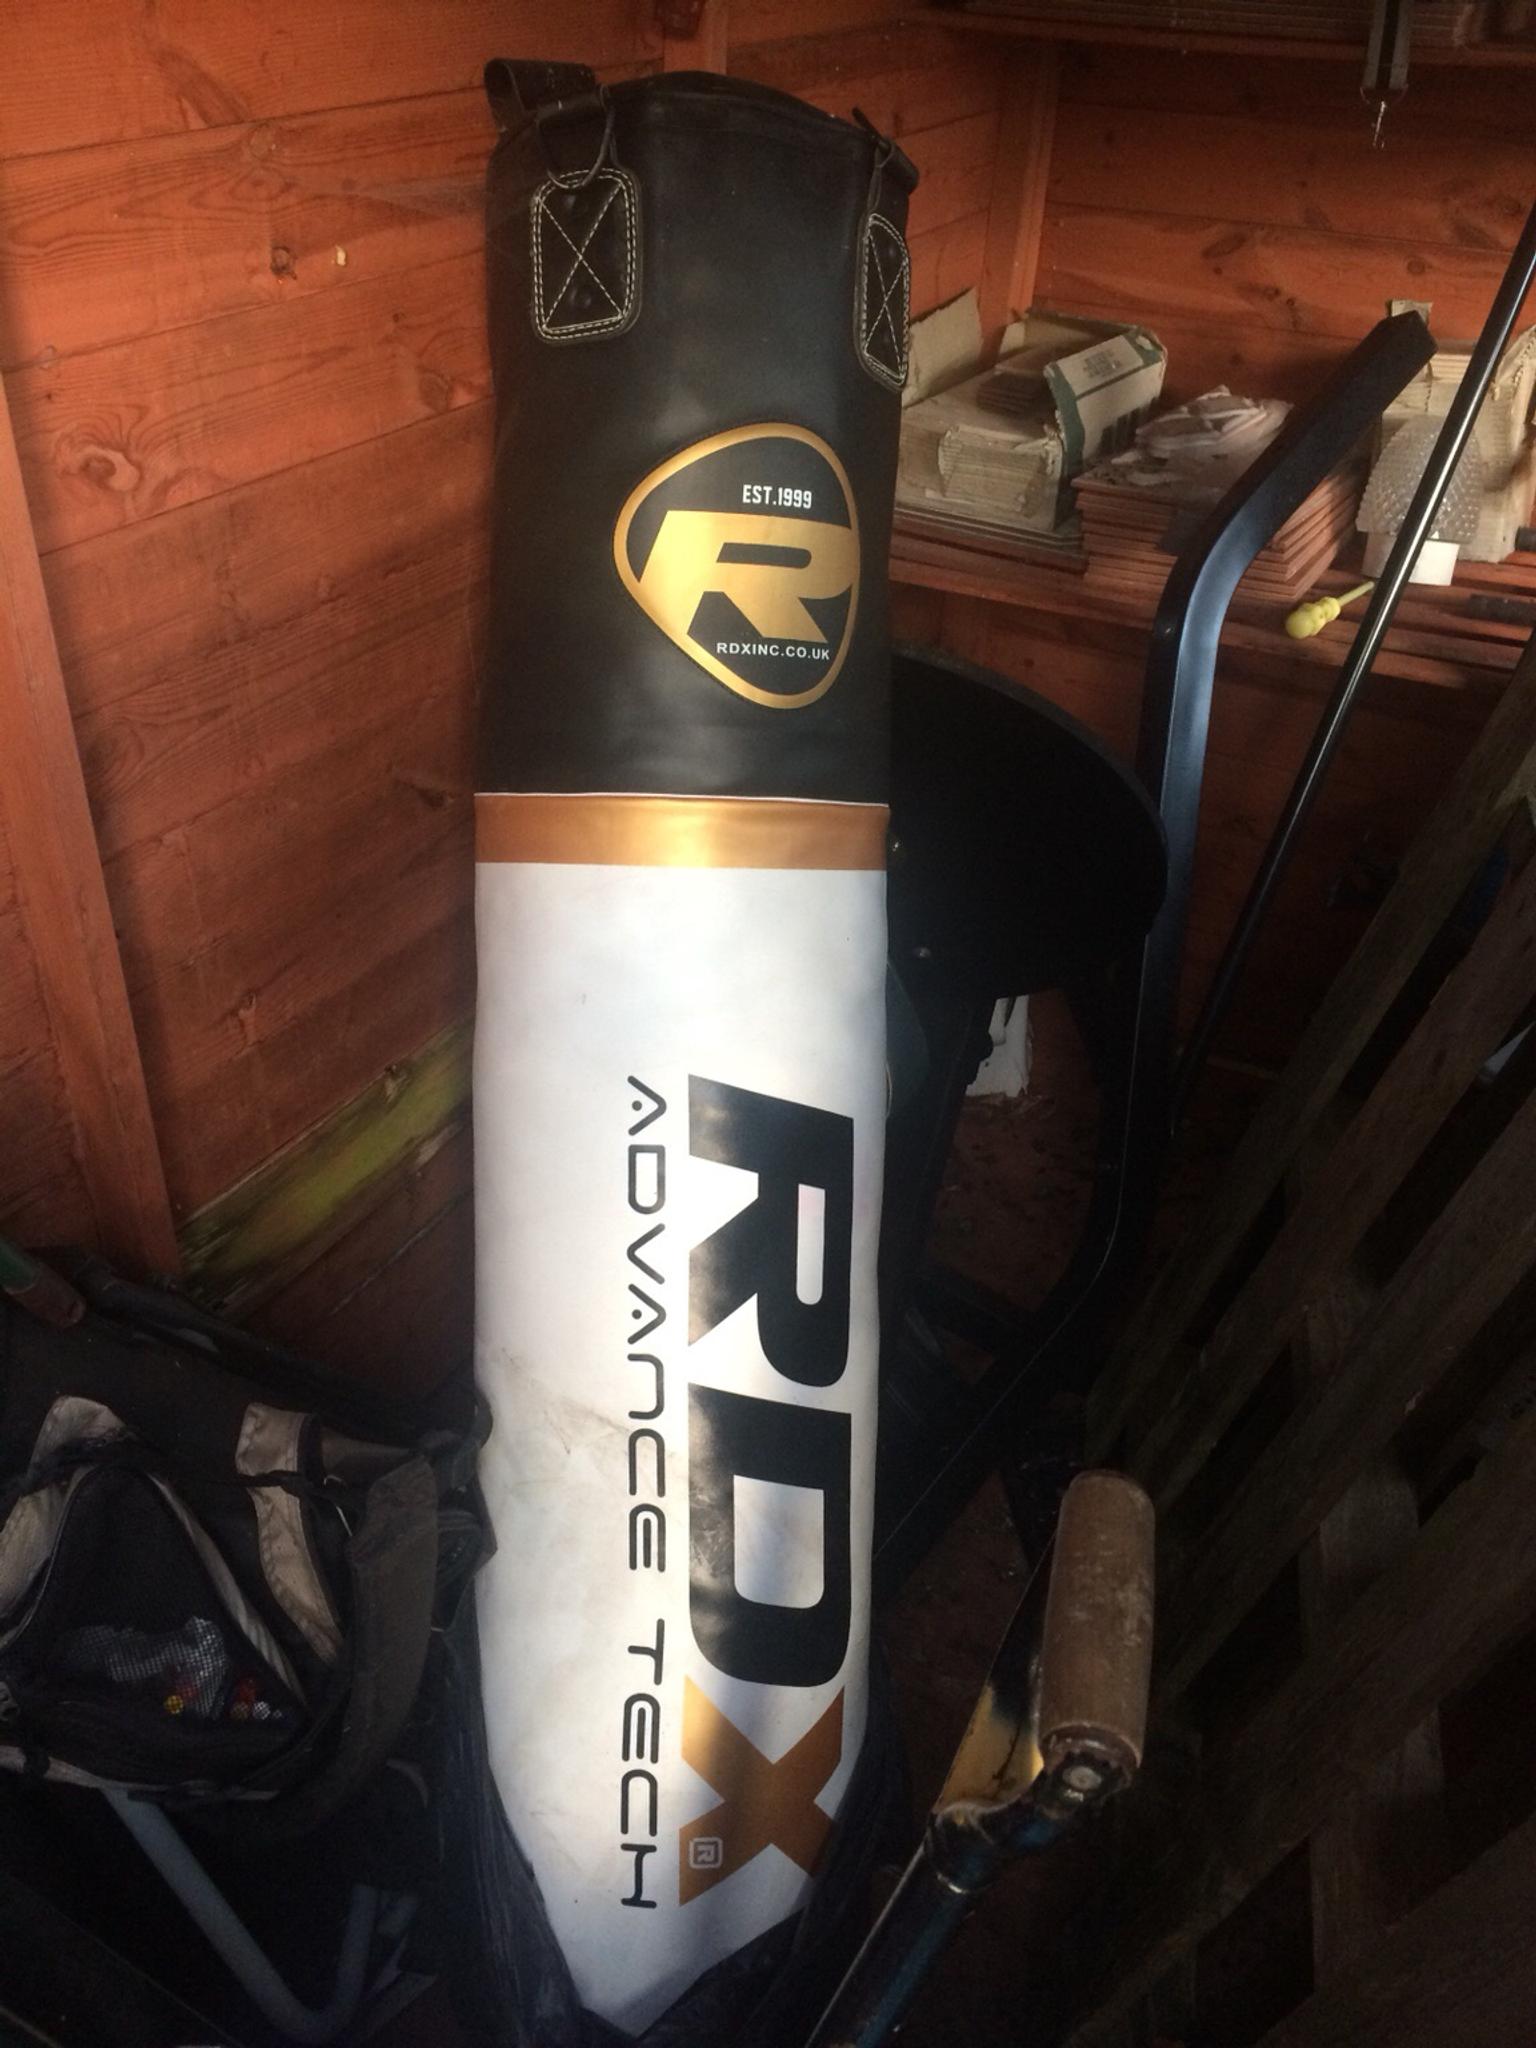 Punch bag/speed bag stand in WV14 Dudley for £85.00 for sale | Shpock